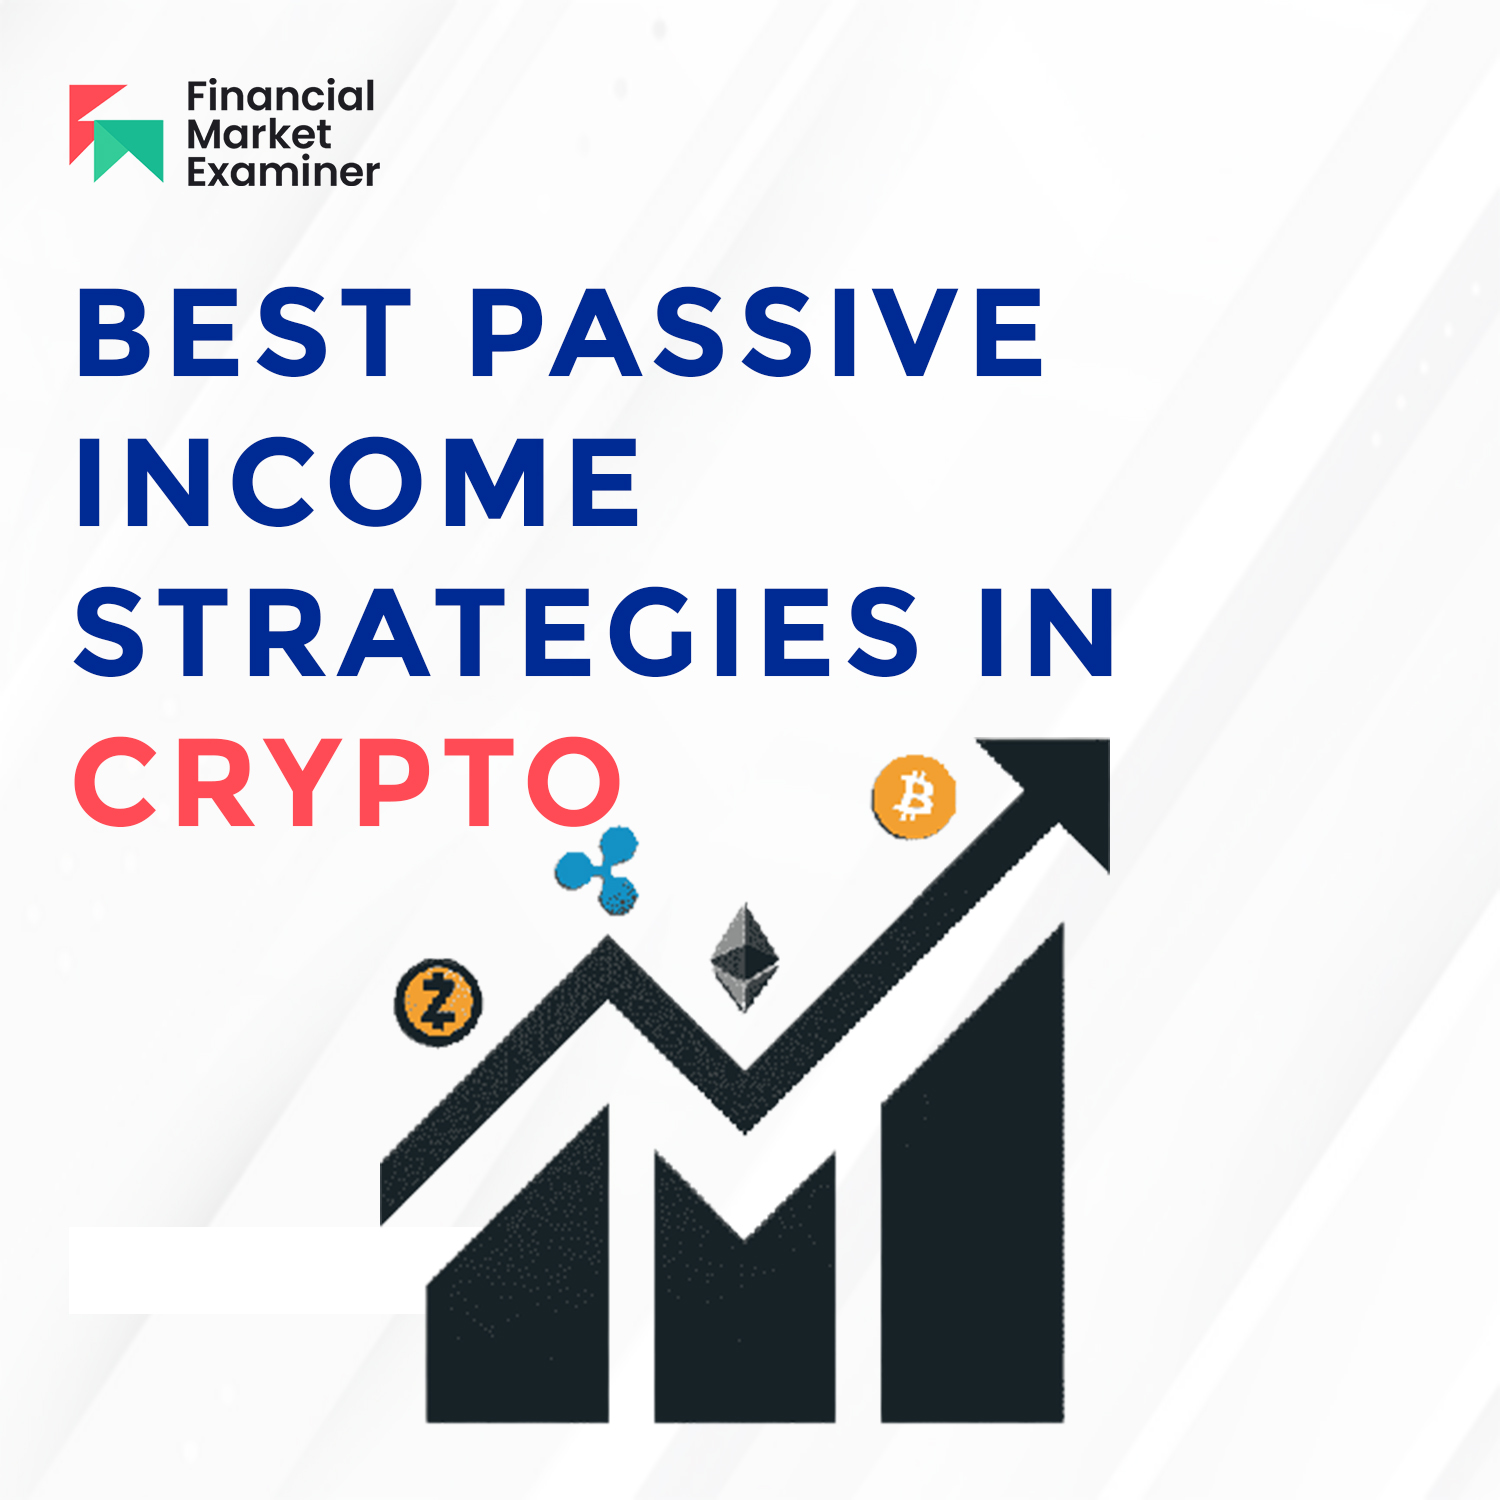 Best passive income strategy in crypto